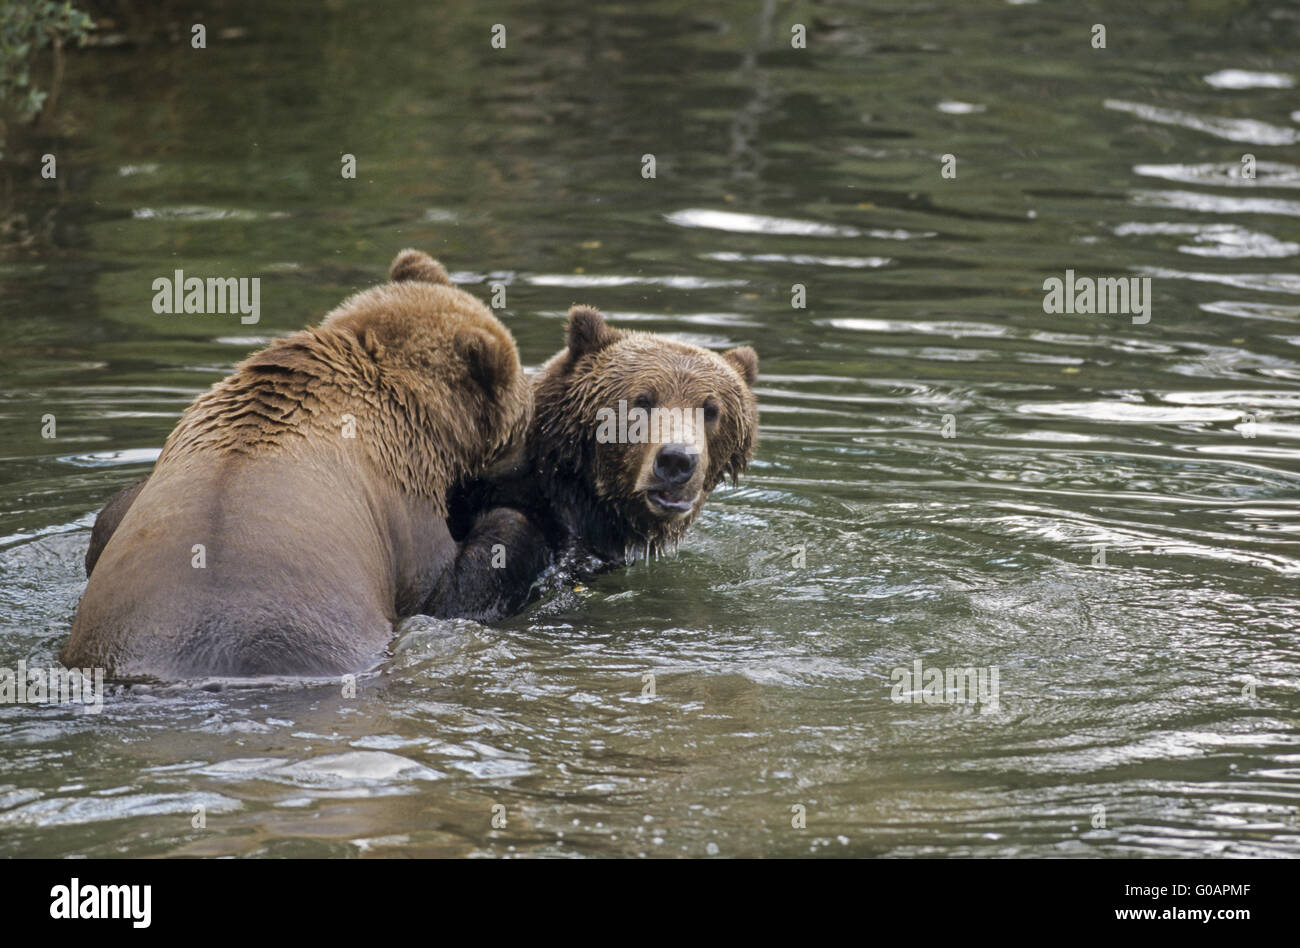 Two Grizzly Bears playfully fighting in water Stock Photo